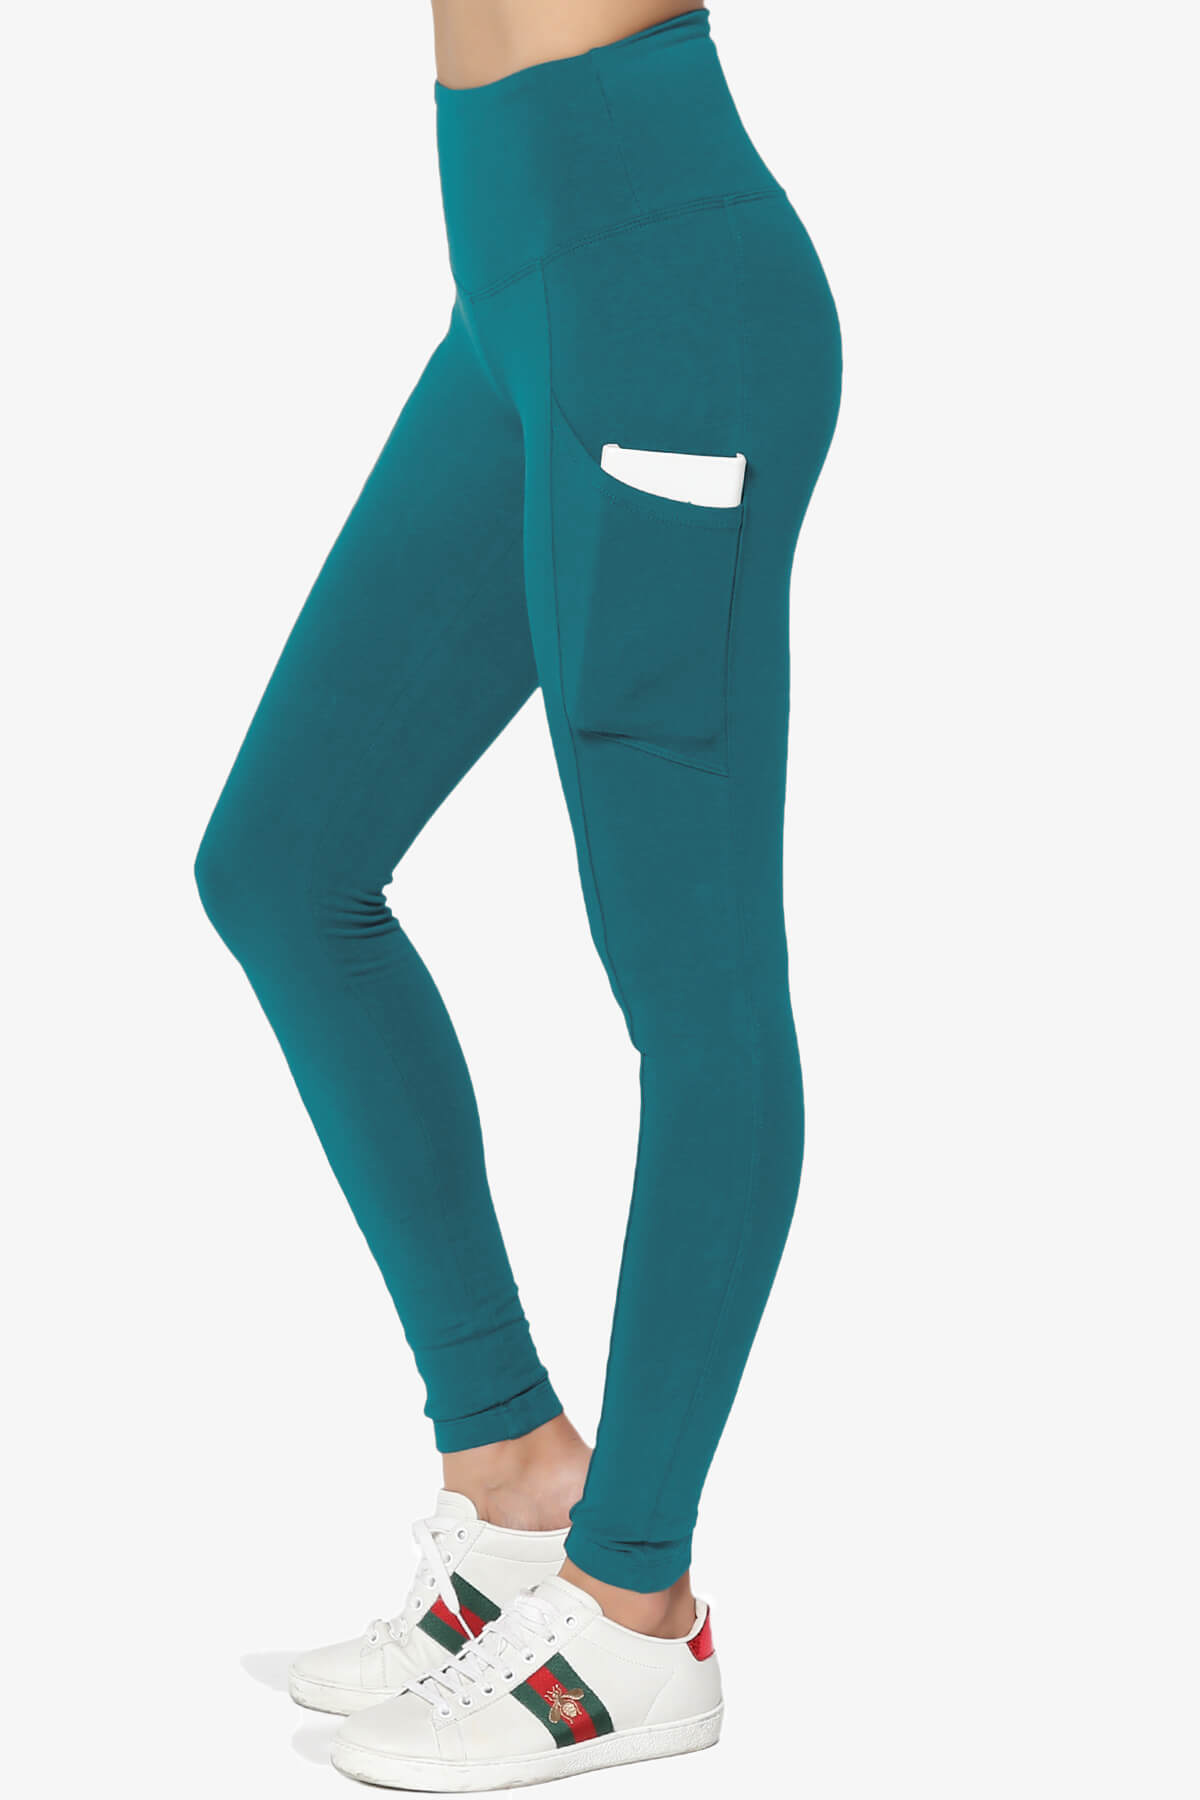 Ansley Luxe Cotton Leggings with Pockets TEAL_1